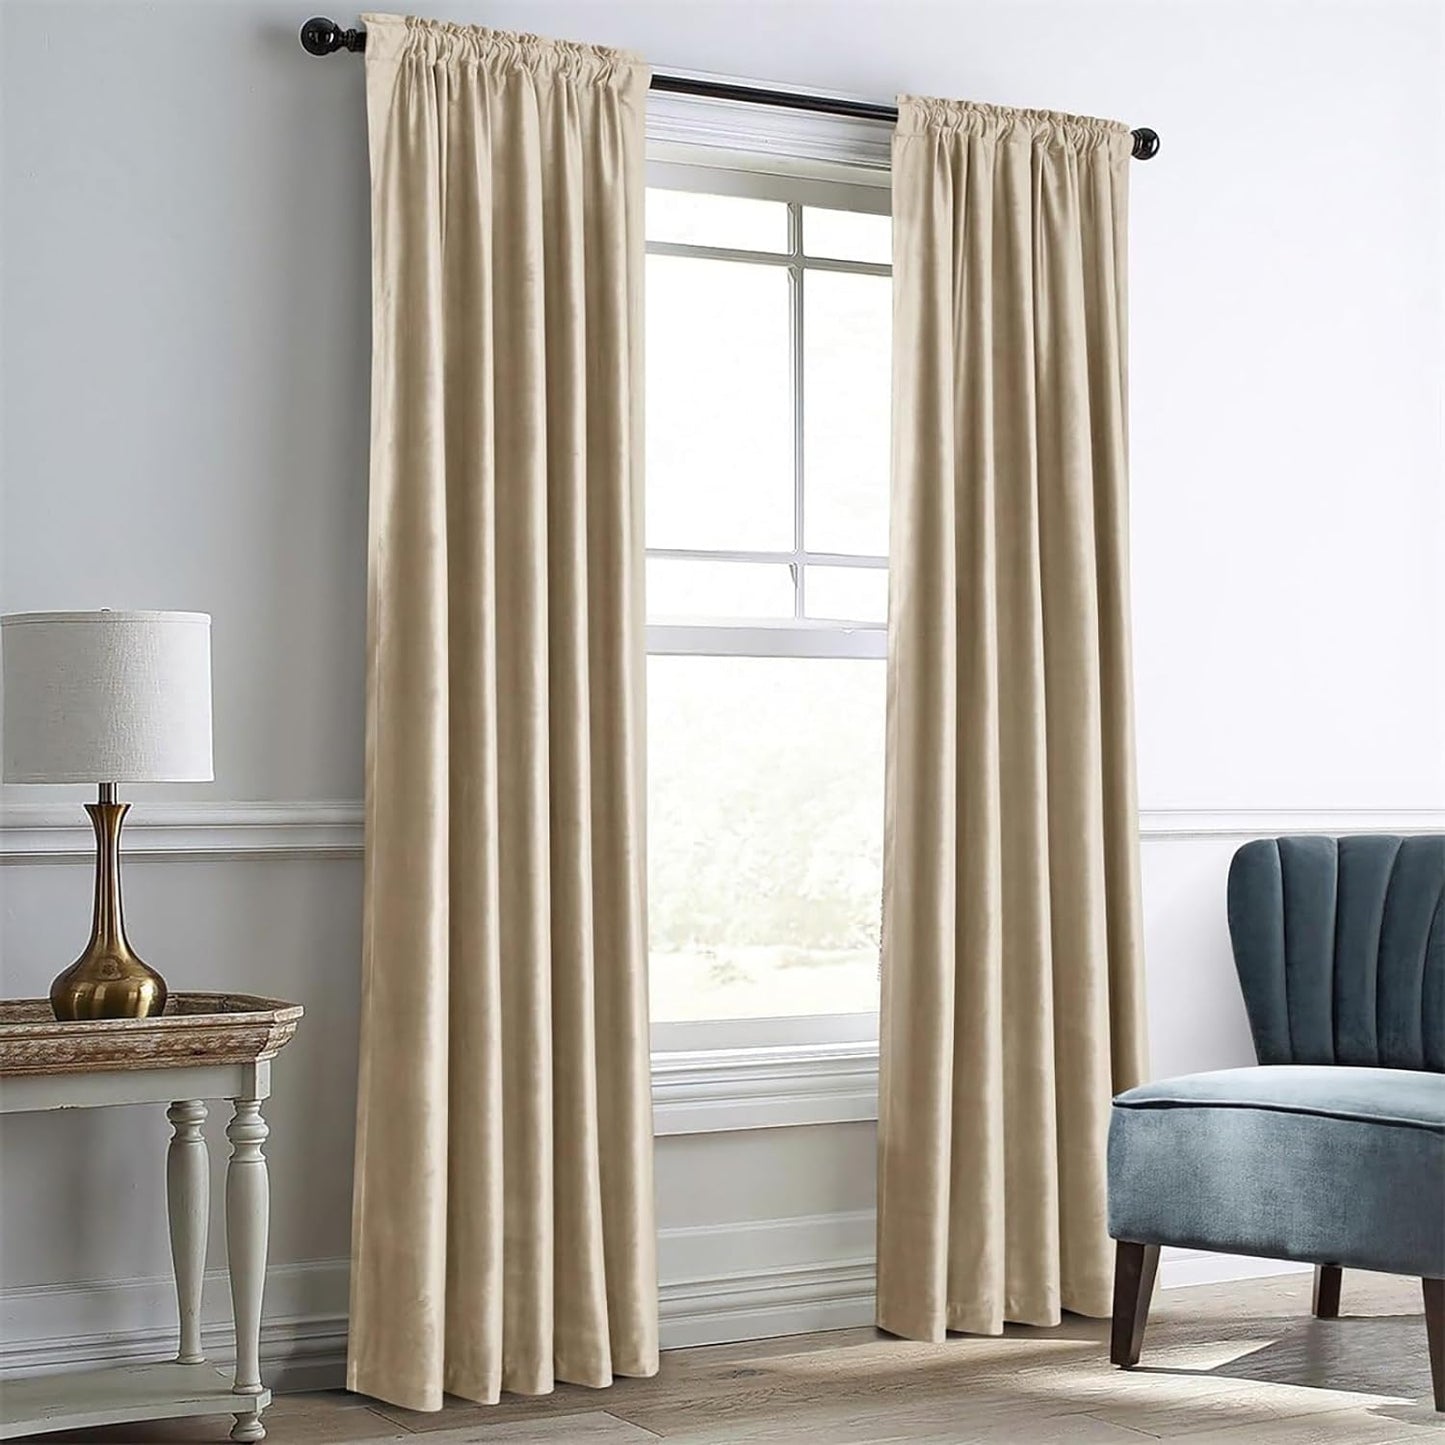 Dreaming Casa Royal Blue Velvet Room Darkening Curtains for Living Room Thermal Insulated Rod Pocket Back Tab Window Curtain for Bedroom 2 Panels 102 Inches Long, 42" W X 102" L  Dreaming Casa Camel 2 X (52"W X 63"L) 